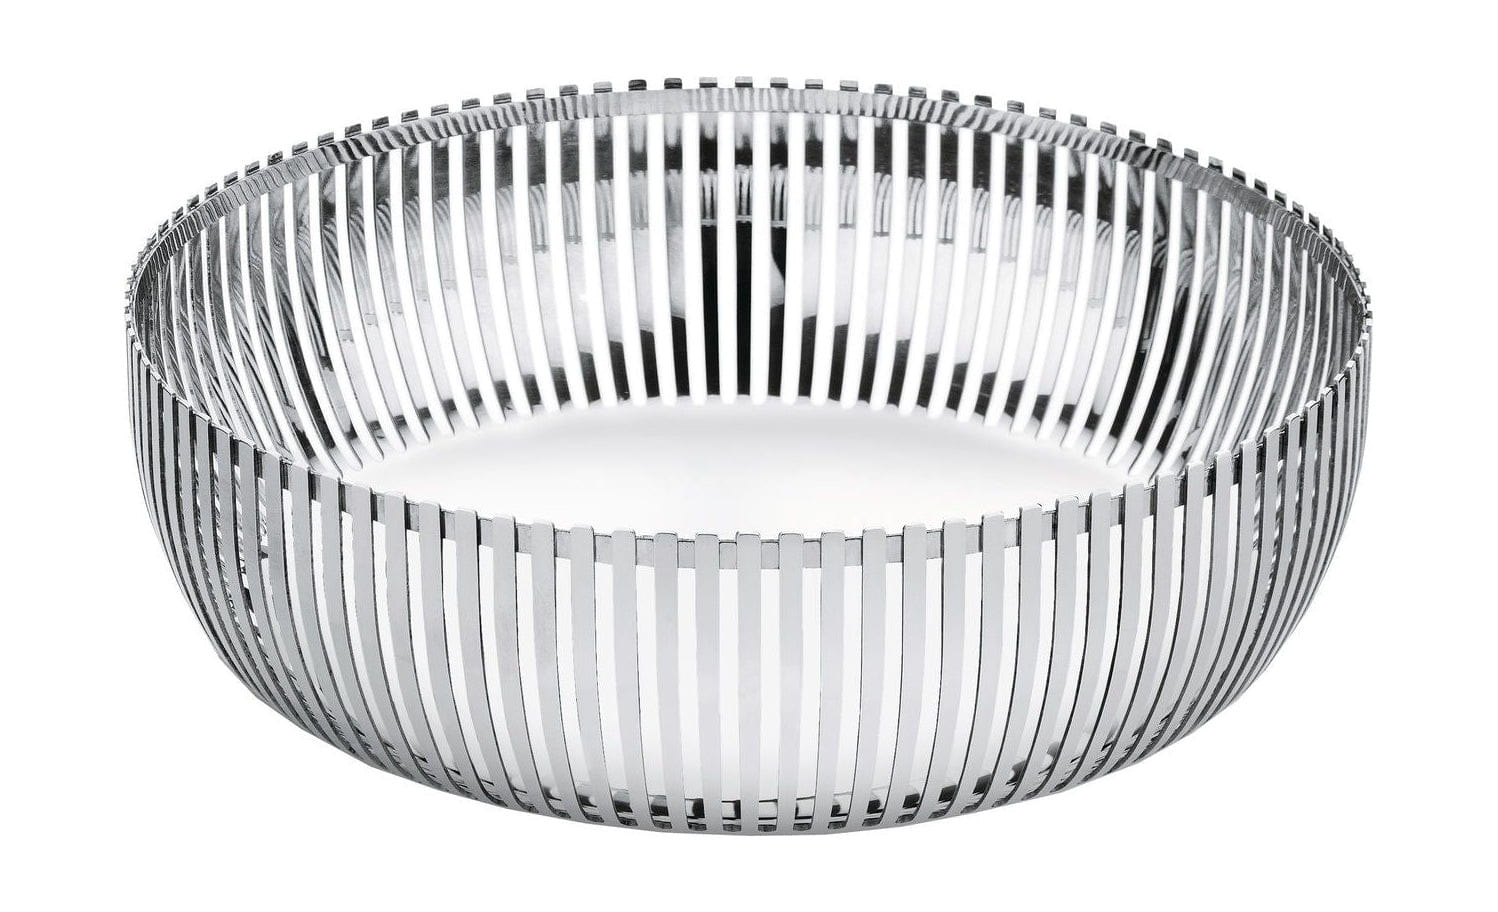 Alessi Pch02 Basket Bowl Made Of Stainless Steel, ø23 Cm